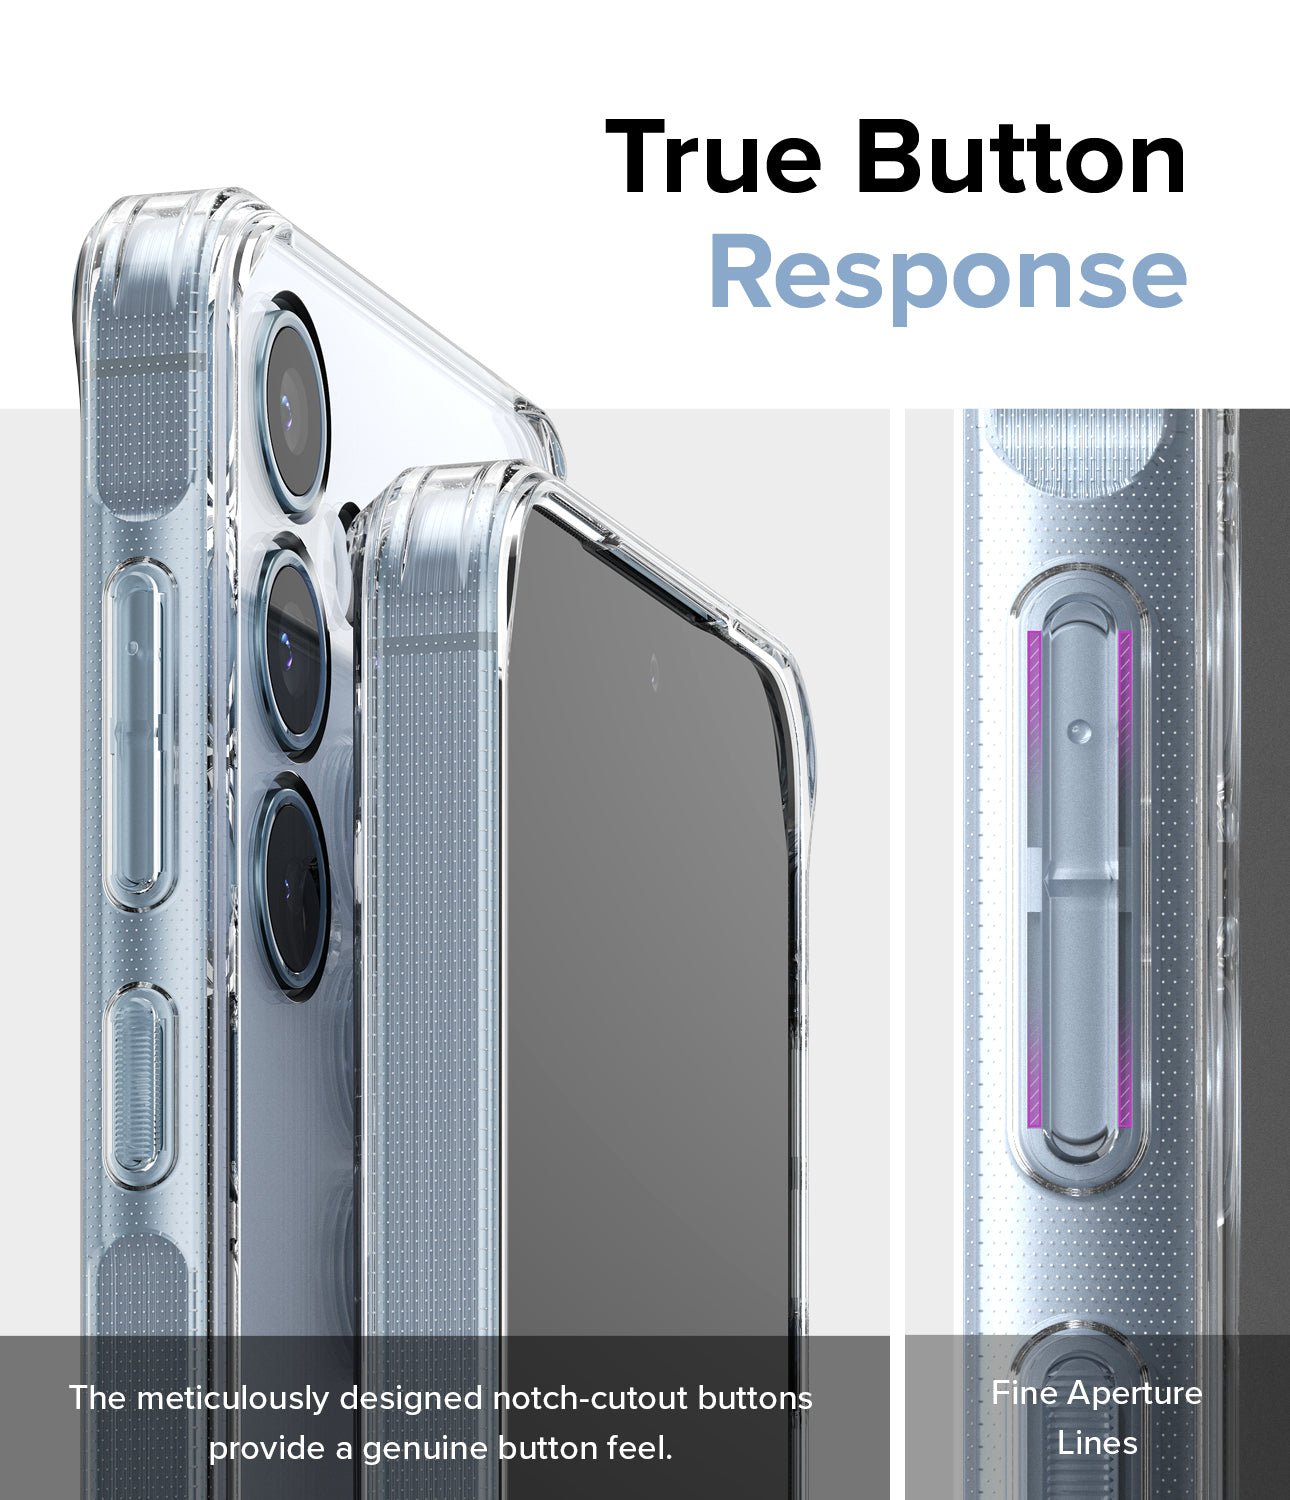 Galaxy A55 Case | Fusion - True Button Response. The meticulously designed notch-cutout buttons provide a genuine button feel. Fine Aperture Lines.